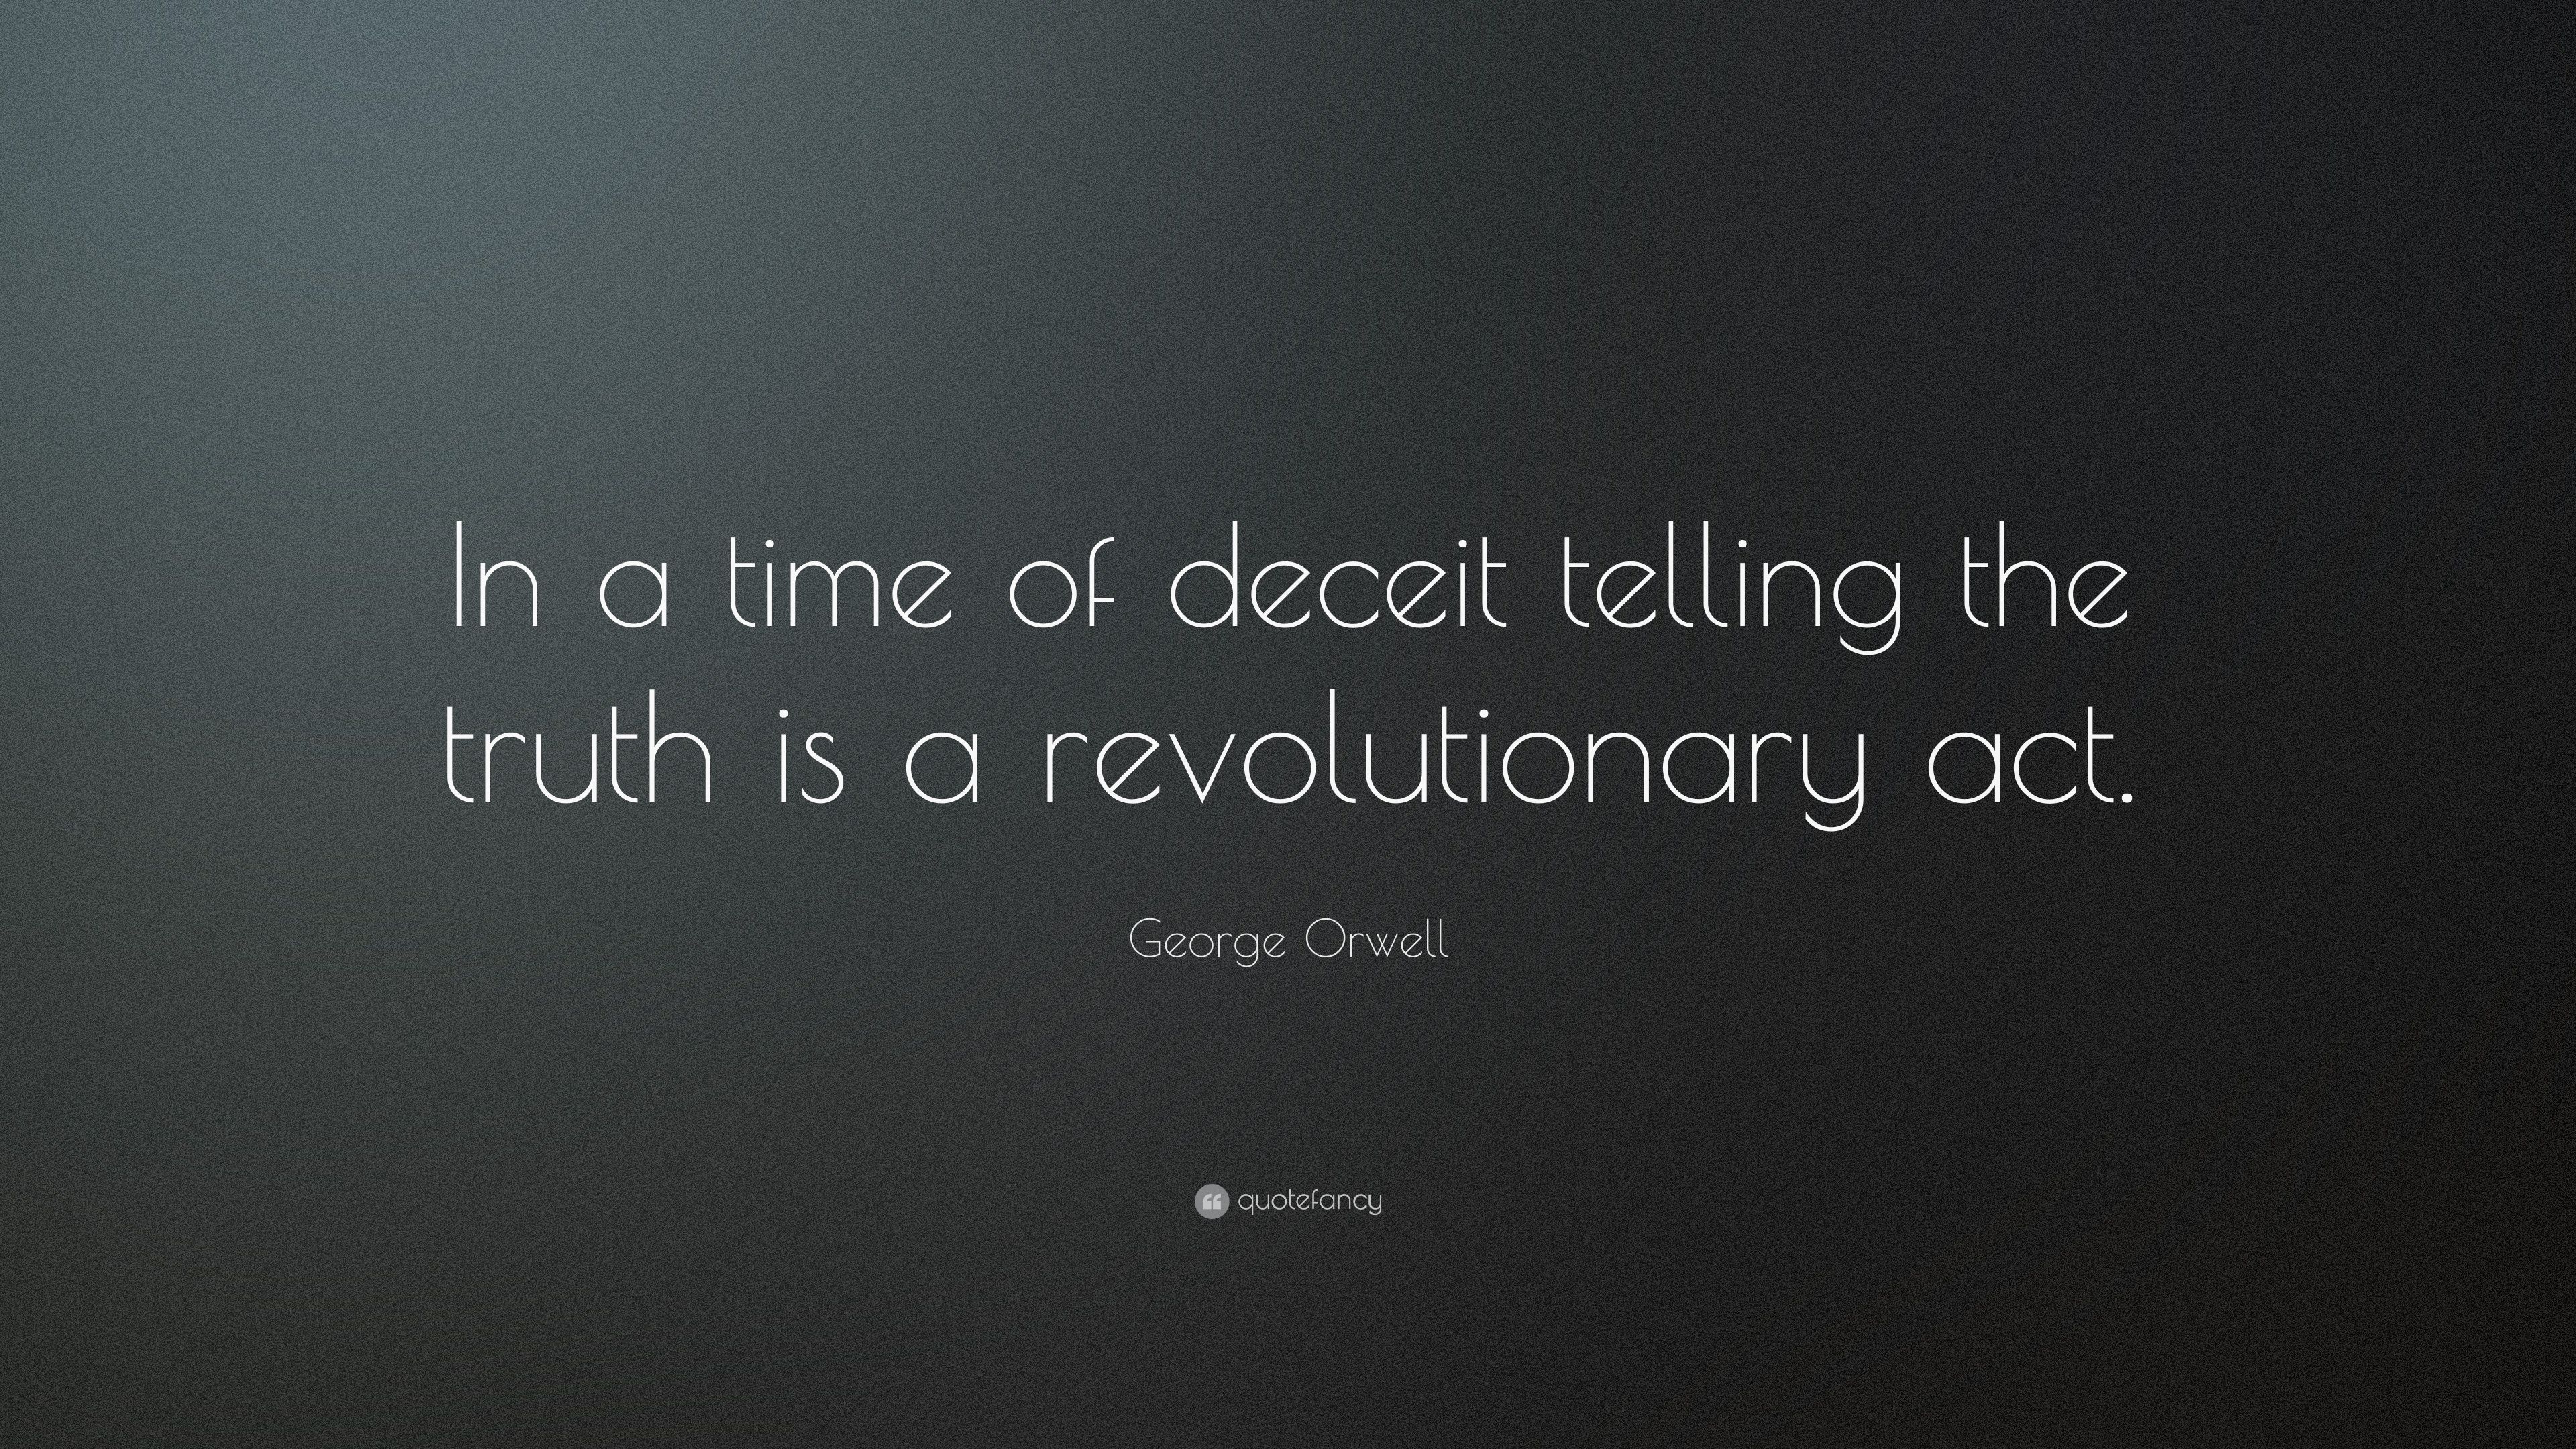 George Orwell Quotes (19 wallpapers) - Quotefancy